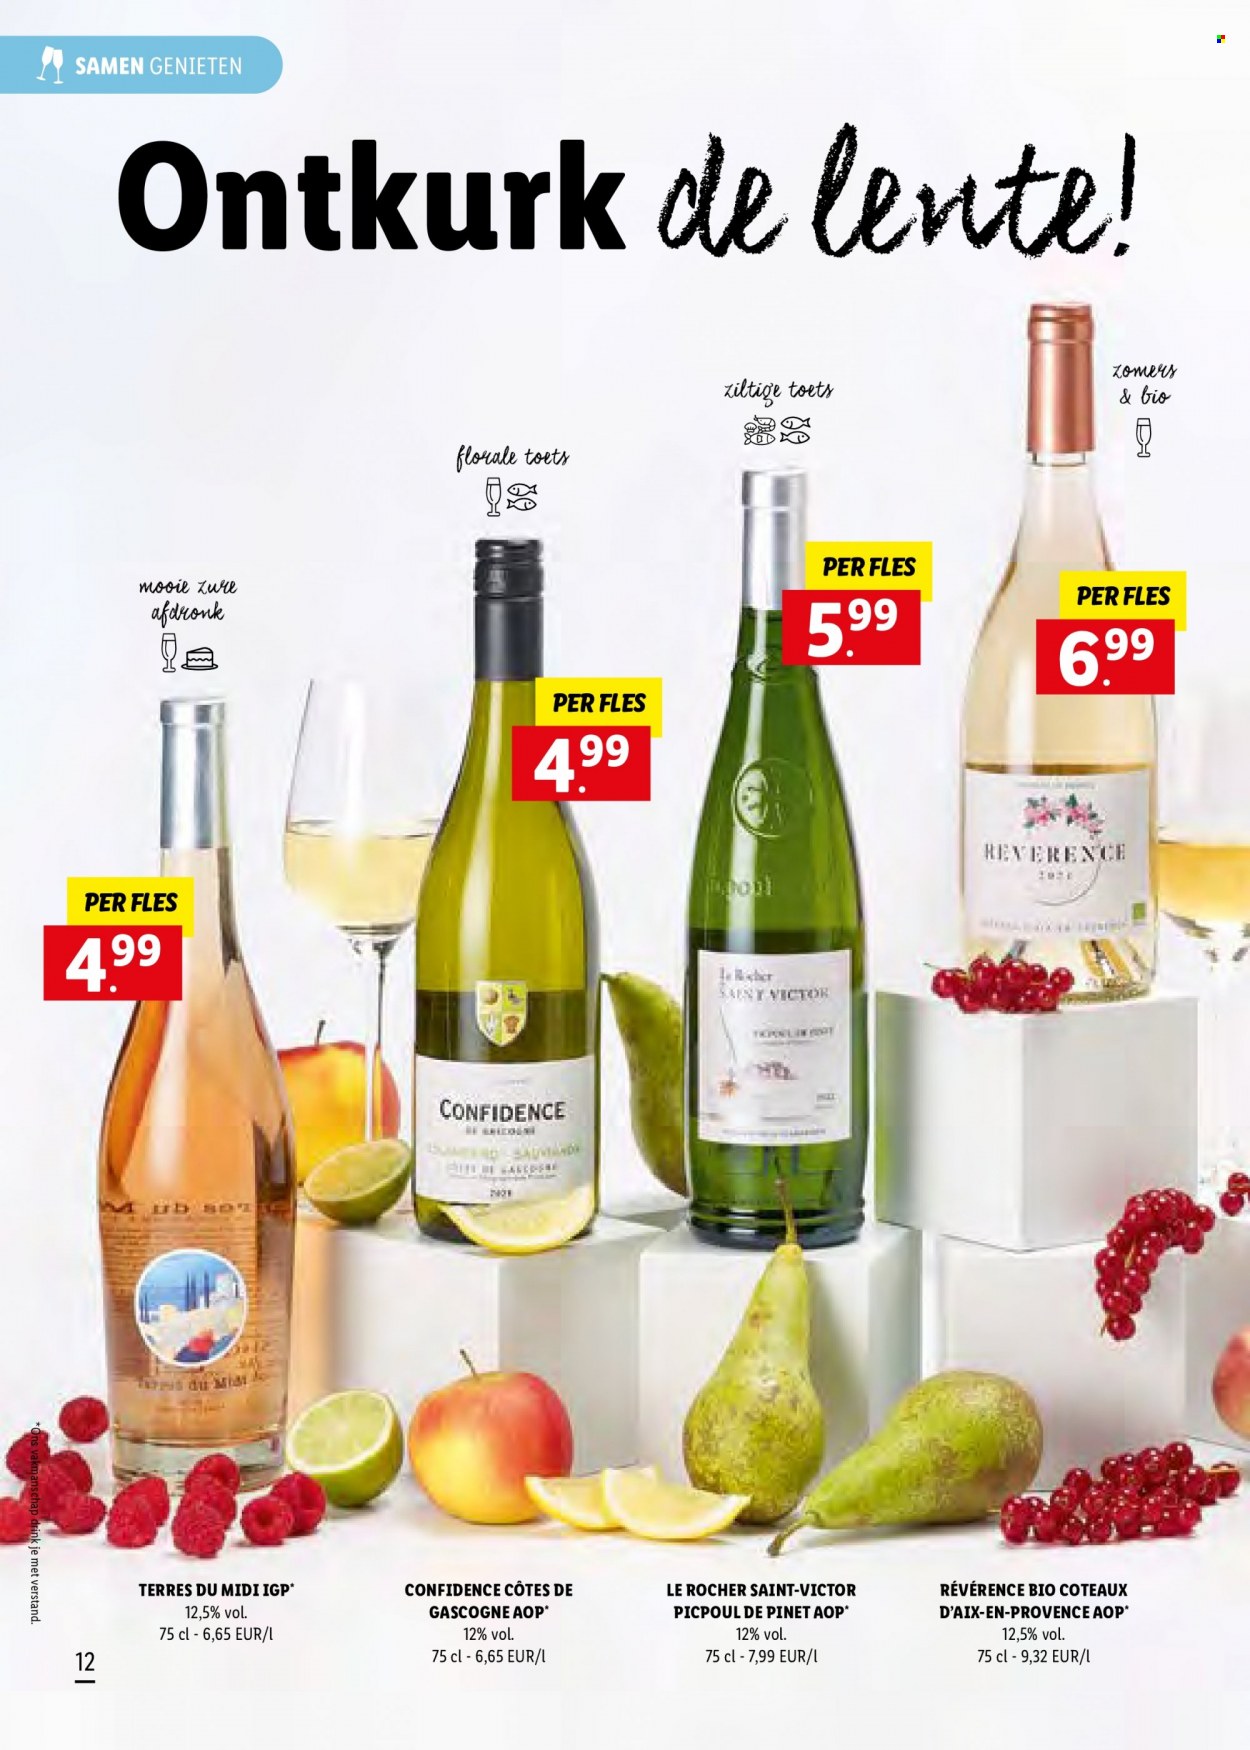 Catalogue Lidl. Page 12.